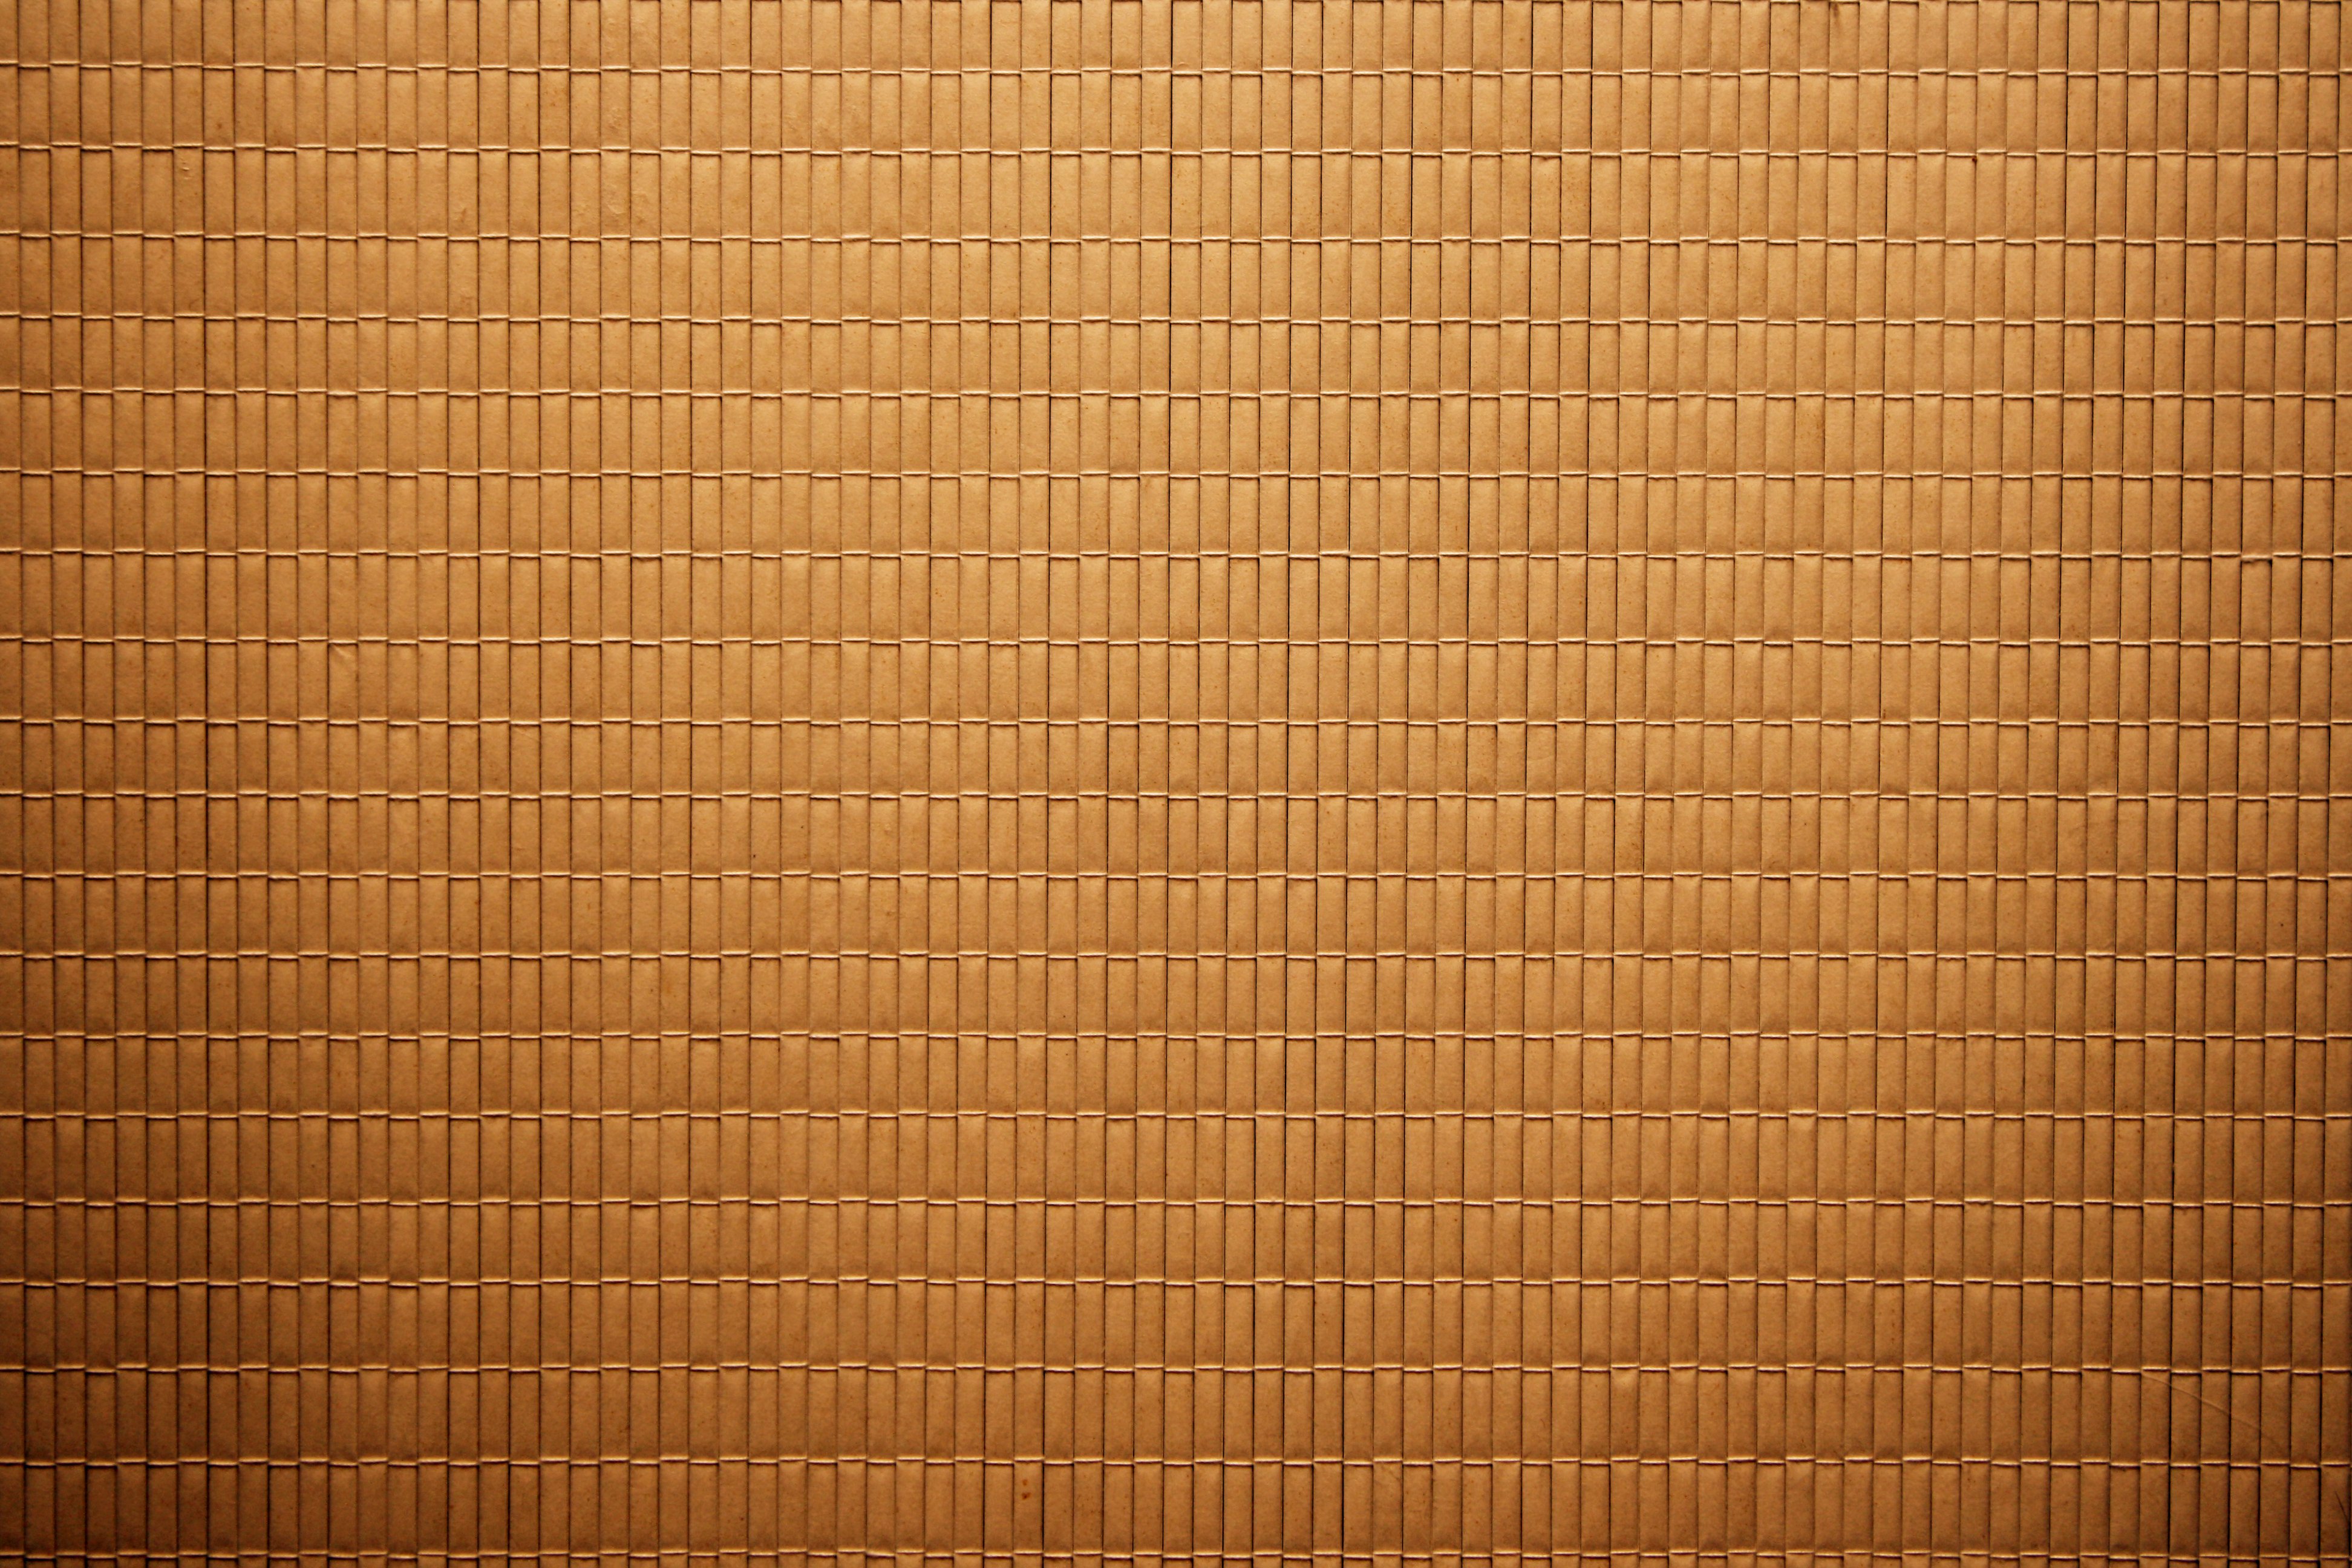 Brown Bamboo Mat Texture Picture Free Photograph Photos Public